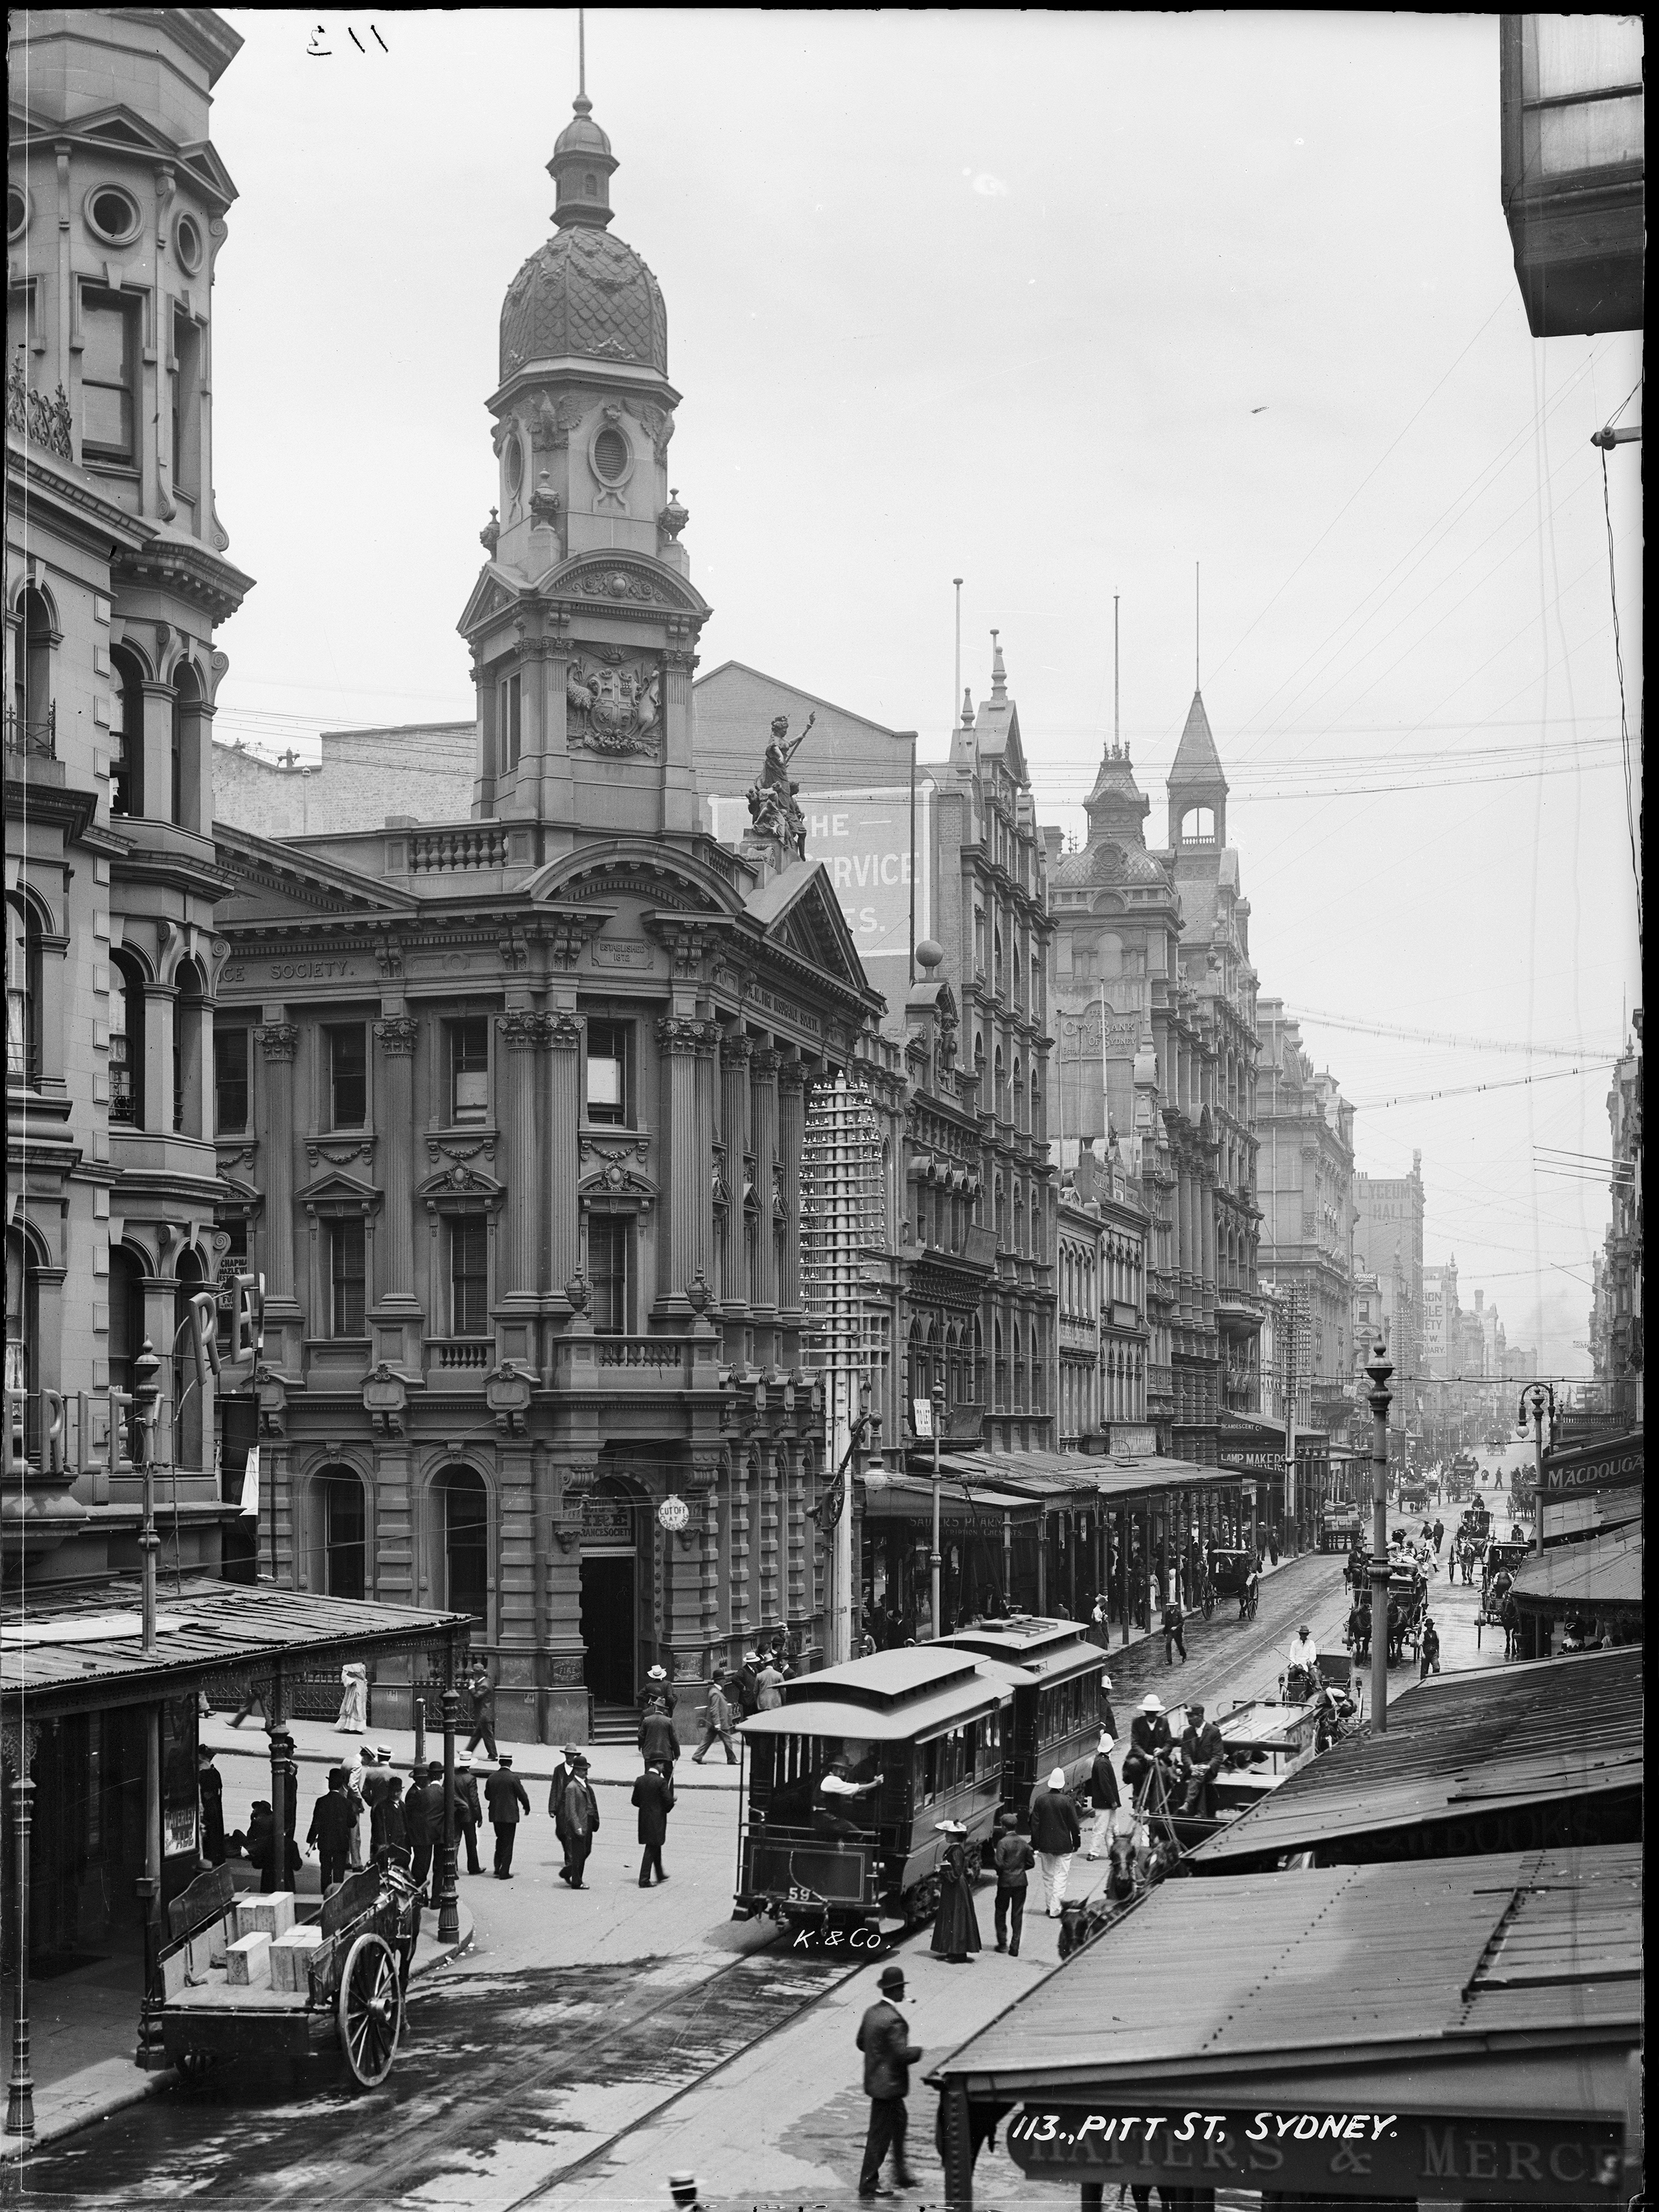 'Pitt St, Sydney' by Kerry and Co from the Tyrrell collection